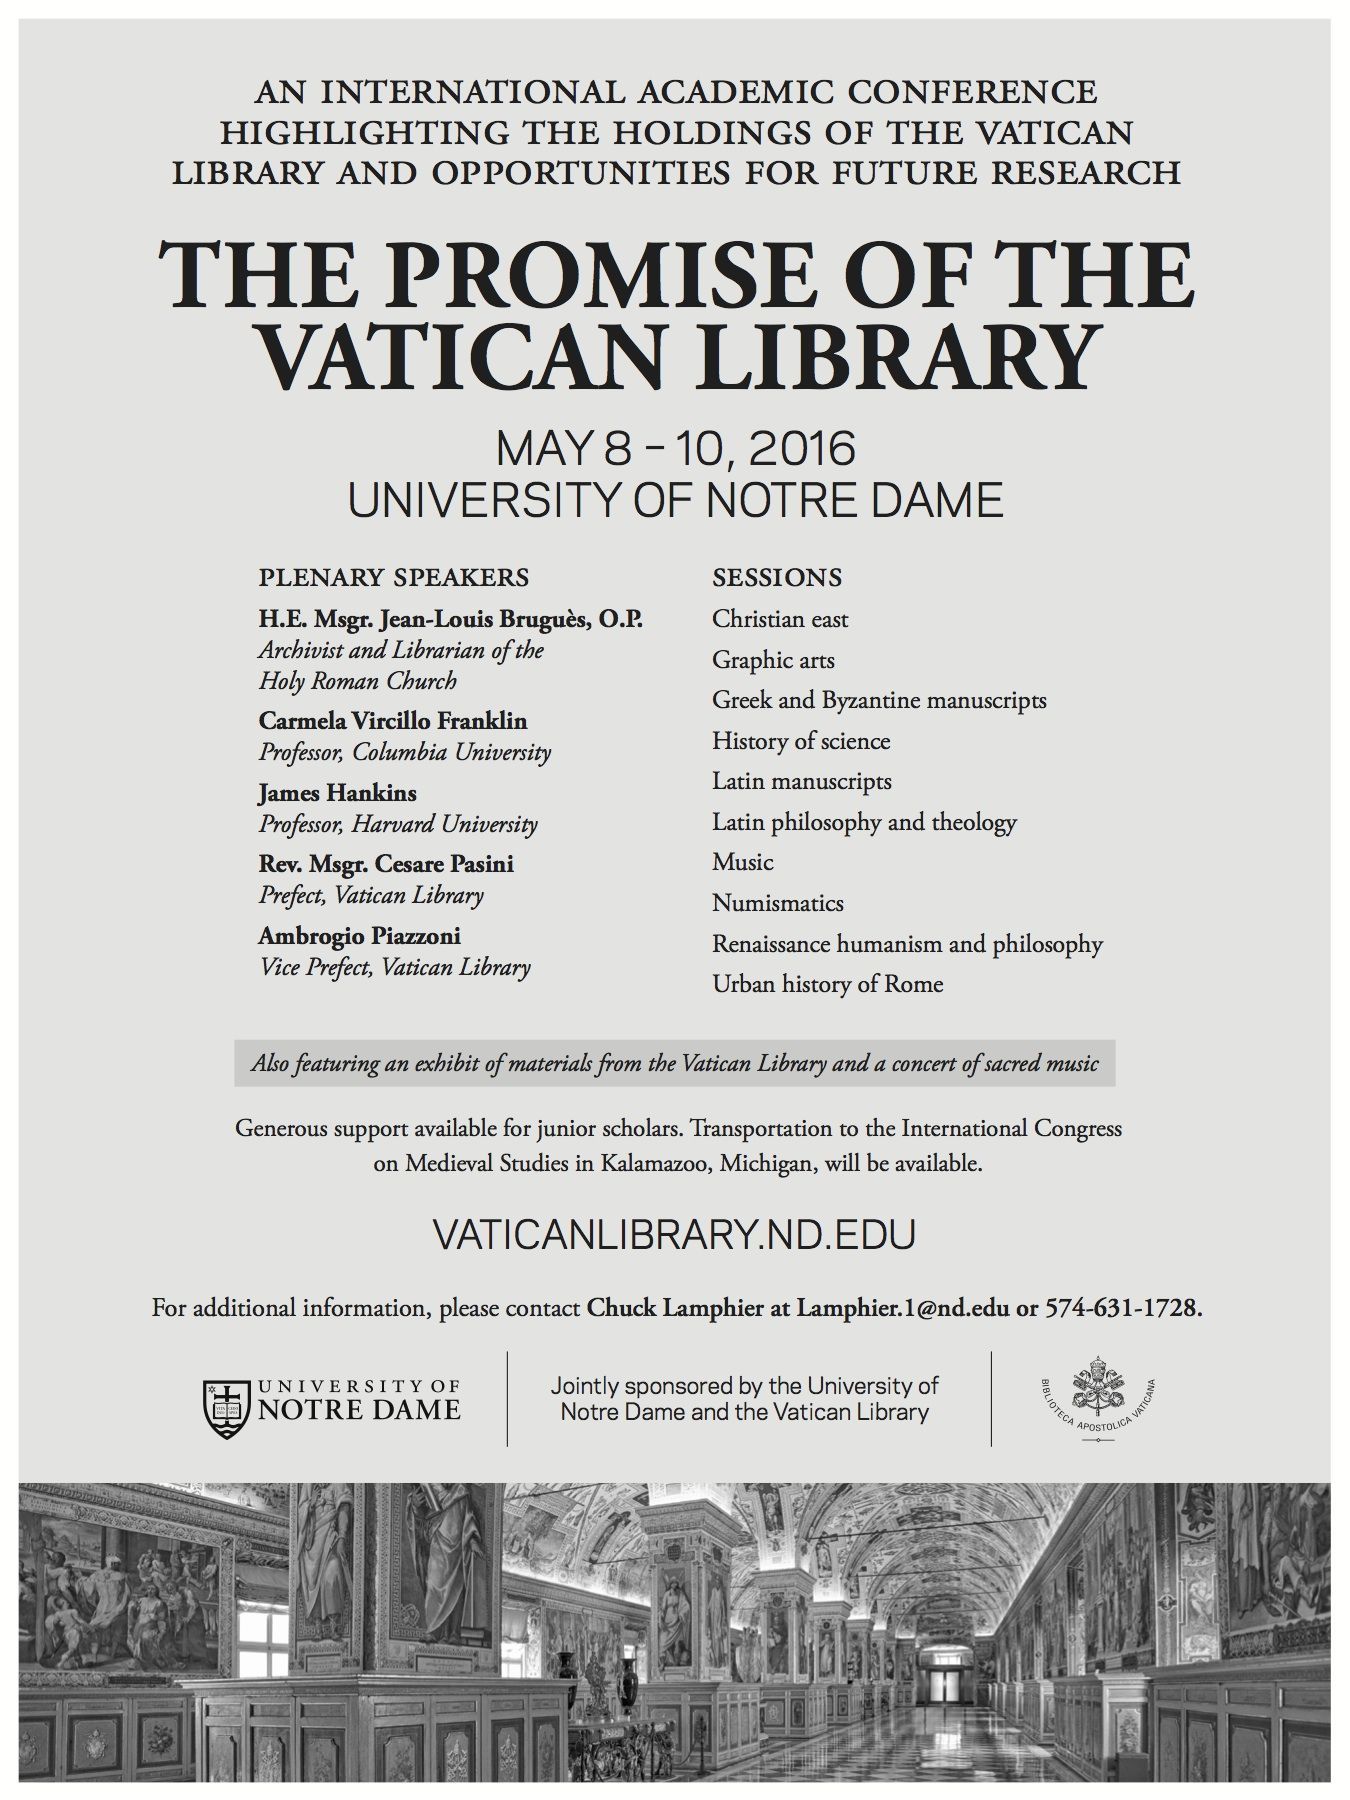 151027_vatican_library_conference_poster_bw